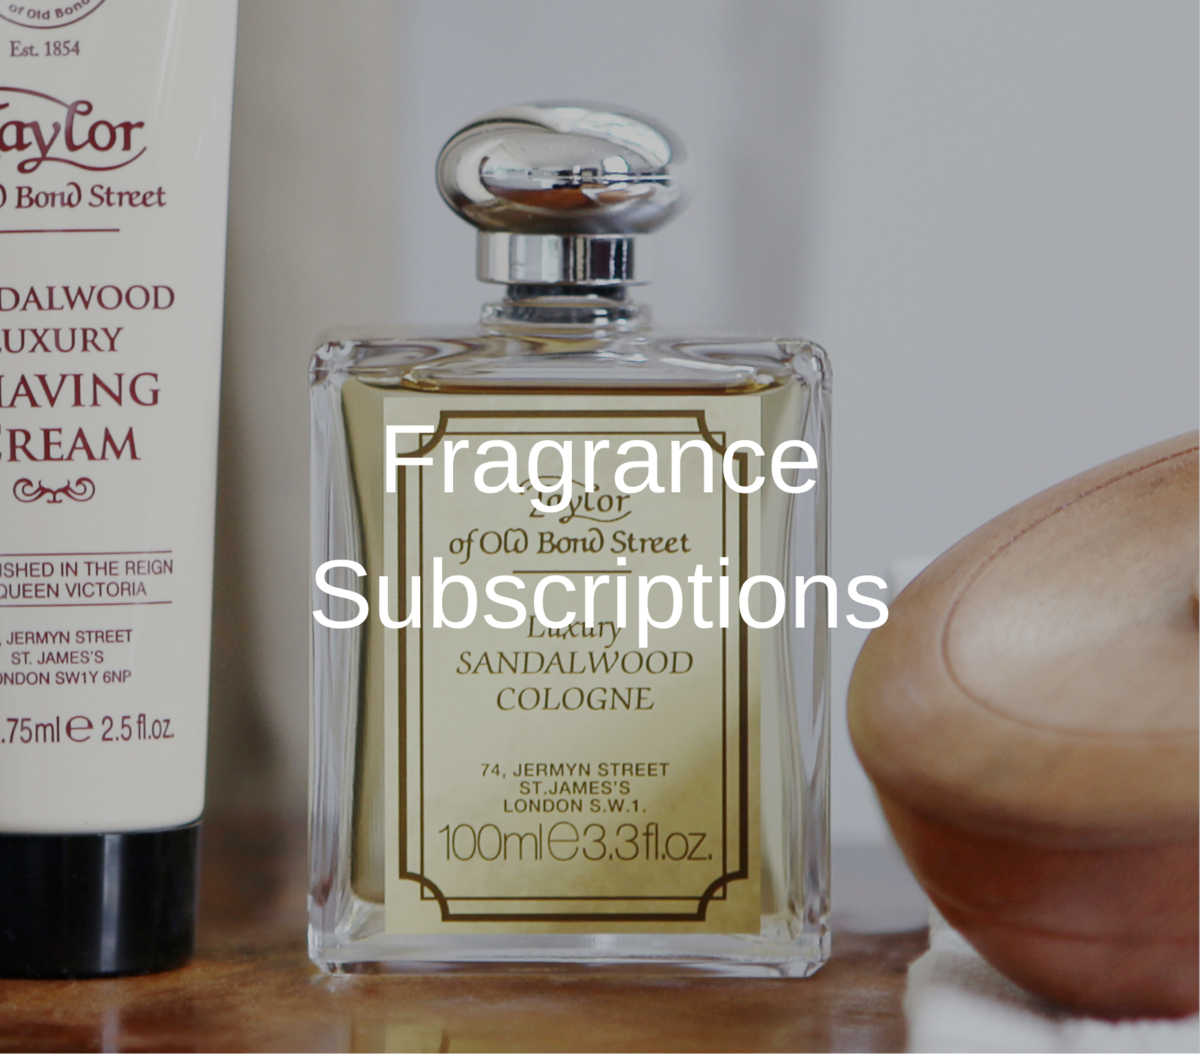 Aftershave and cologne subscription